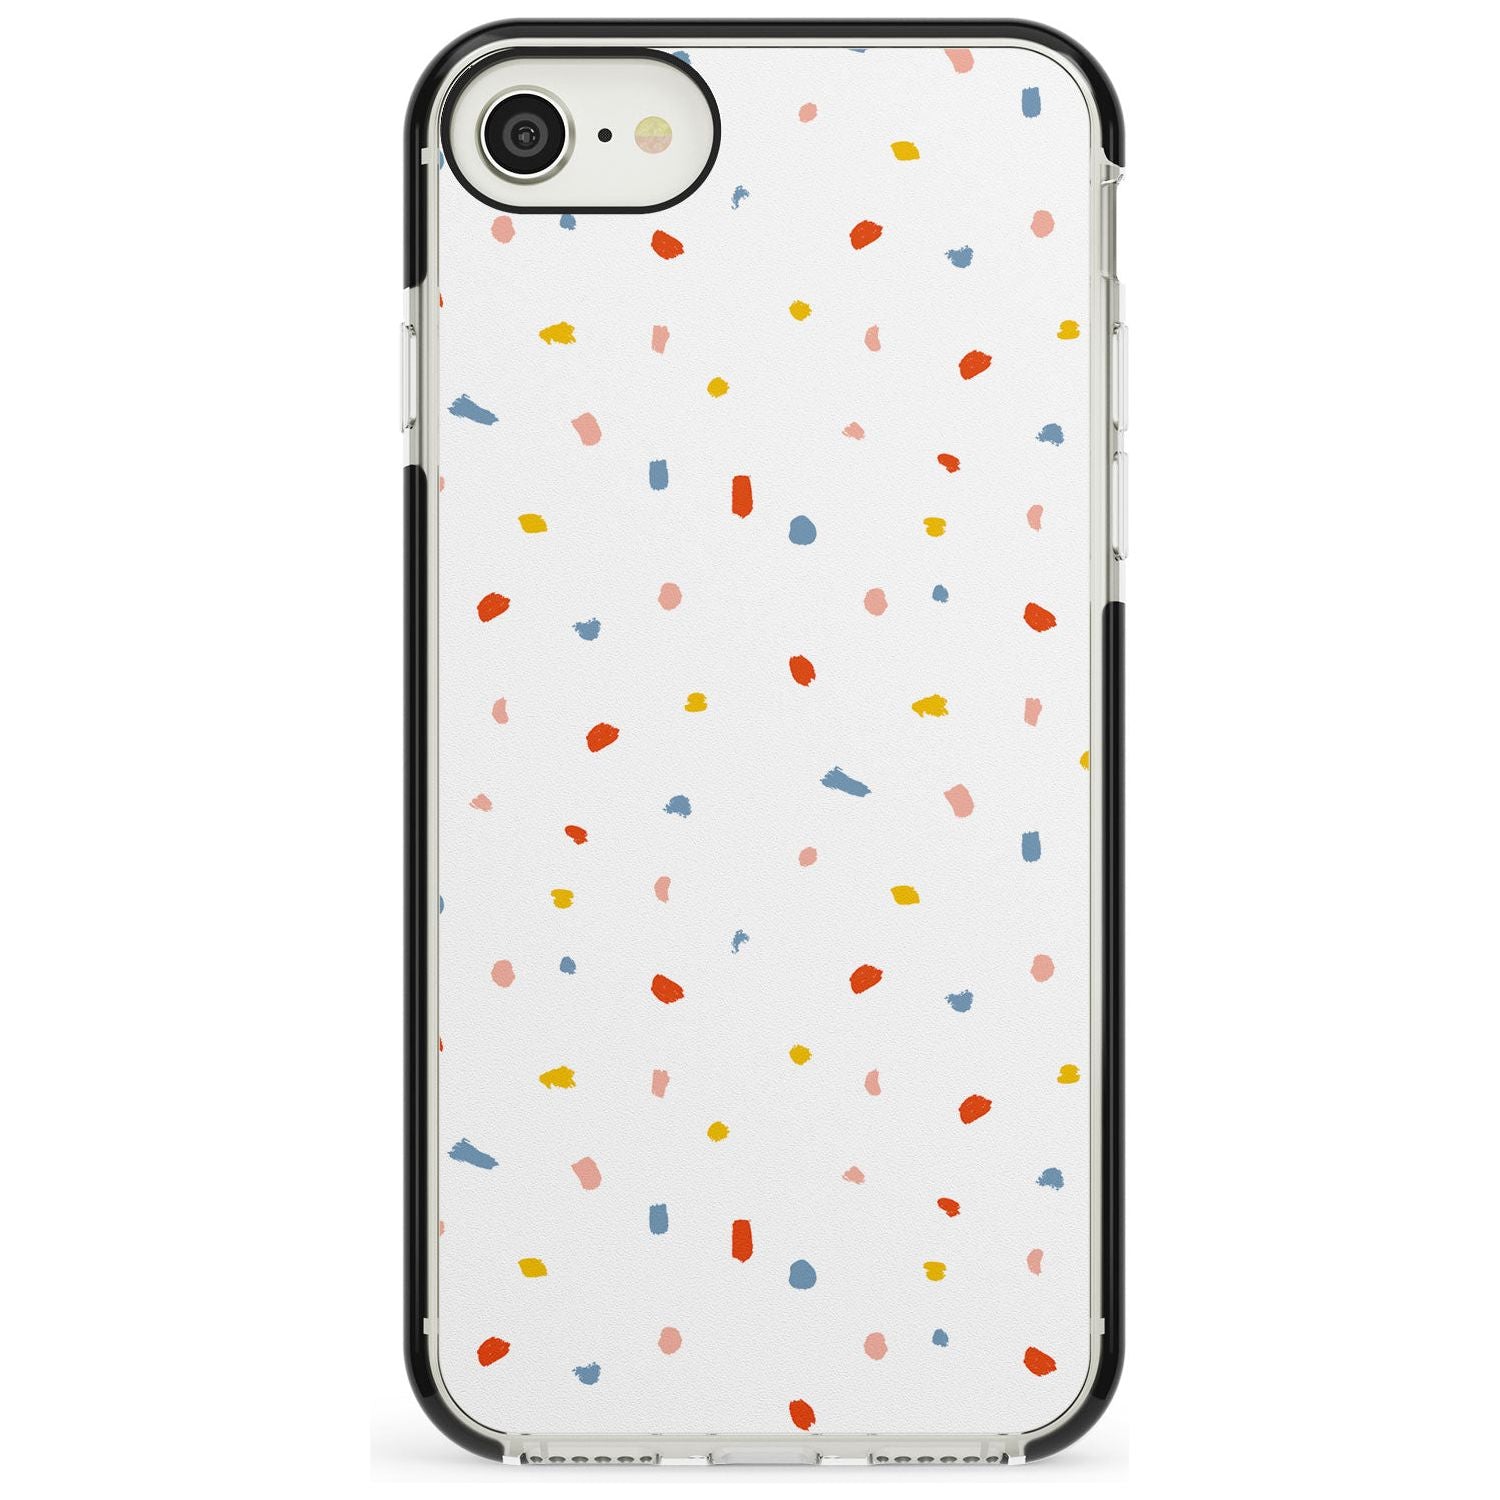 Confetti Print on Solid White Black Impact Phone Case for iPhone SE 8 7 Plus